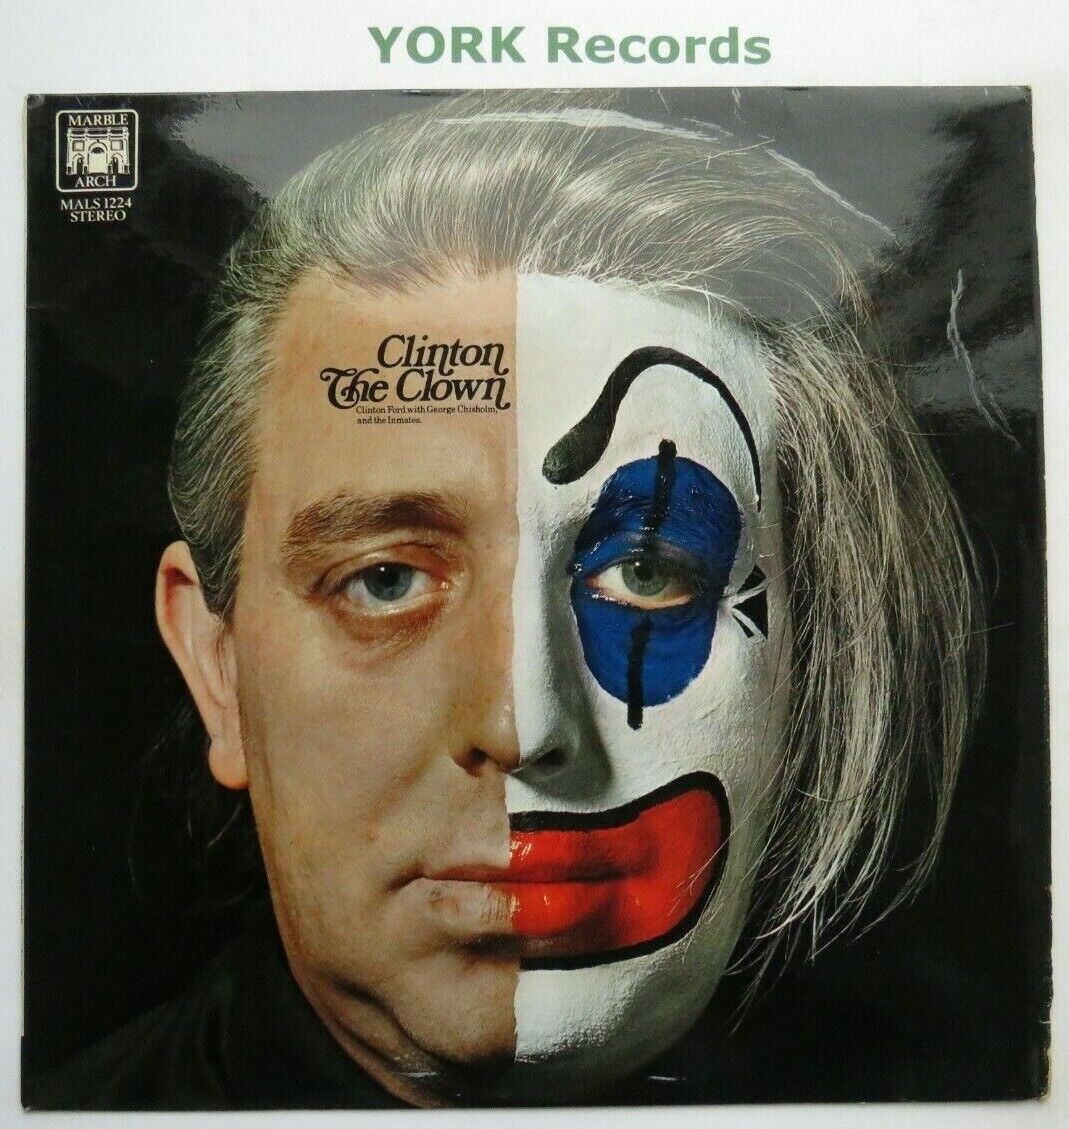 CLINTON FORD with GEORGE CHISHOLM - Clinton The Clown - Ex LP Record Marble Arch